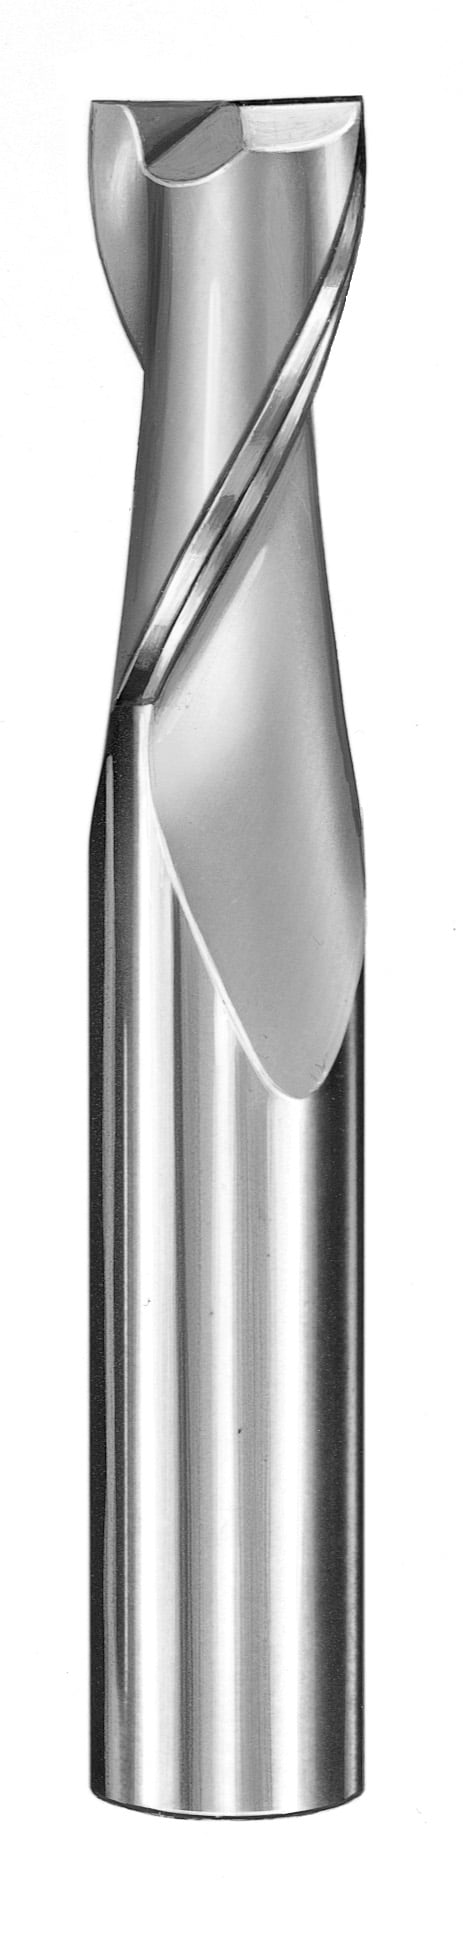 7/64" Dia, 2 Flute, Square End End Mill - 30313